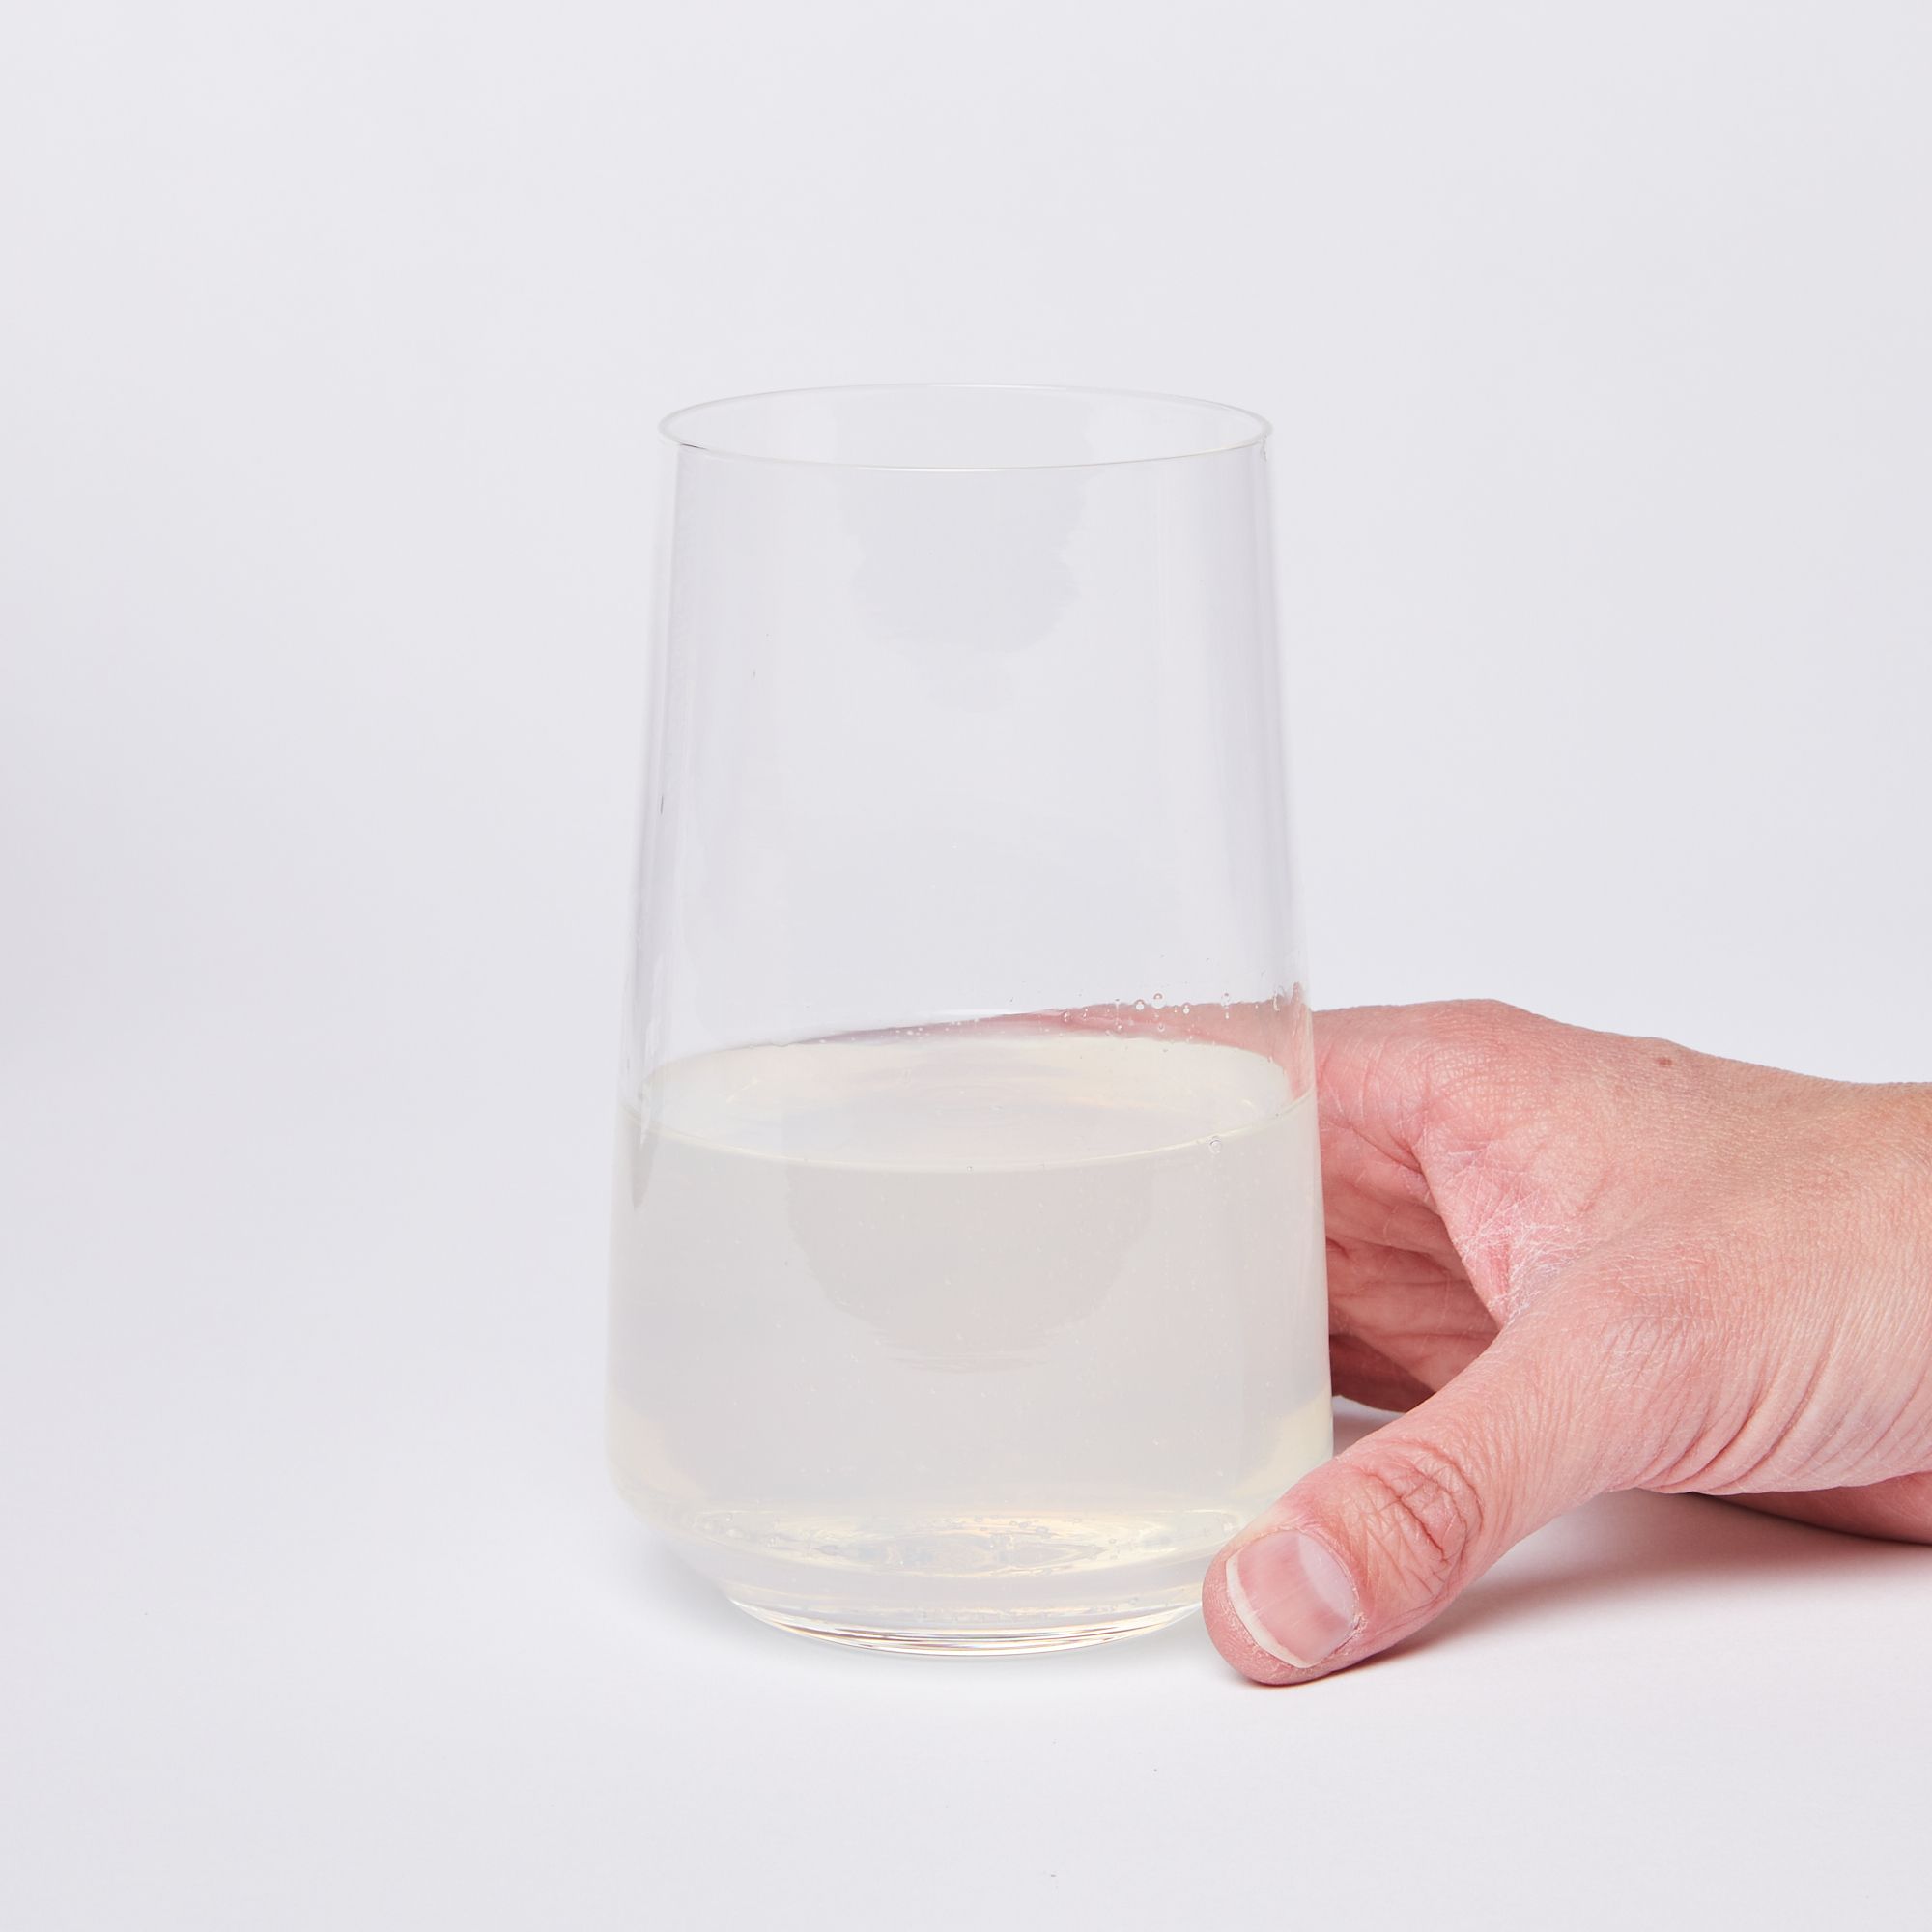 Hand holding a clear round glass half full of a semi-opaque beverage